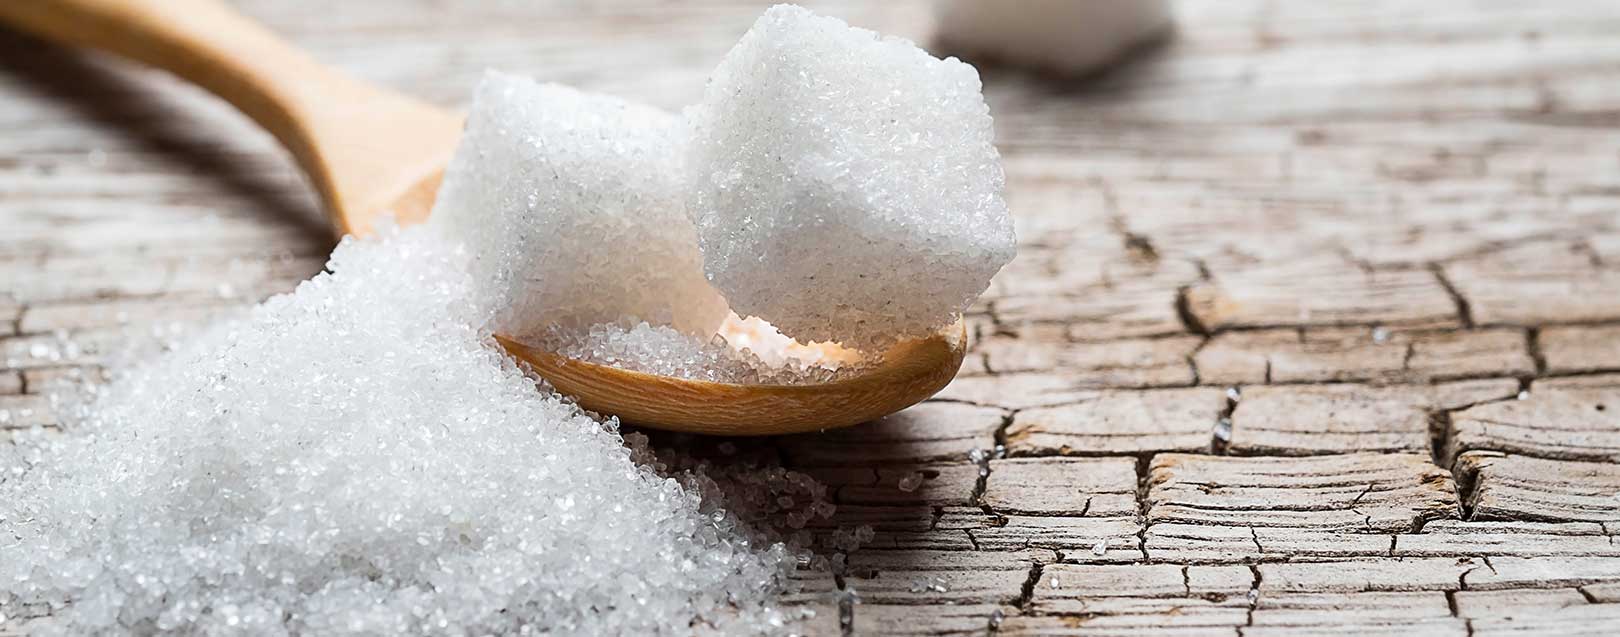 Sugar import permit unlikely to ease prices: ICRA 